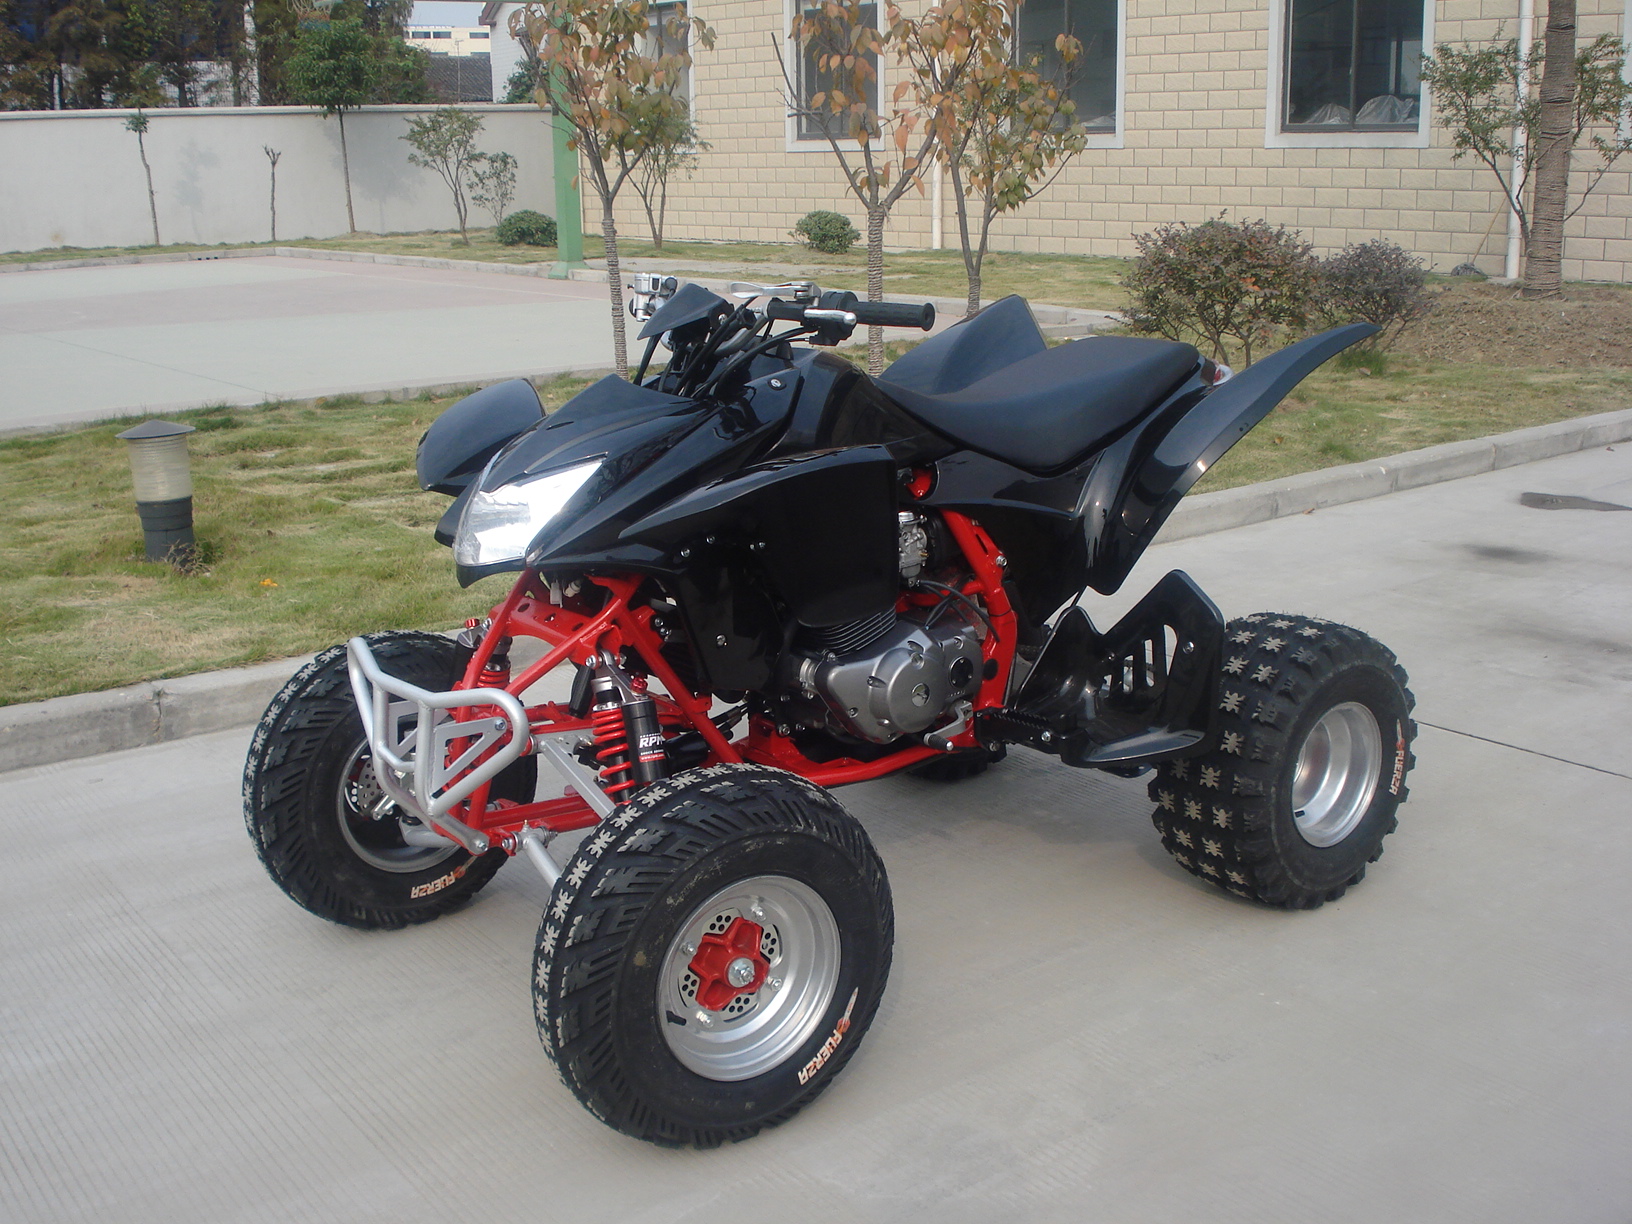 Sports ATV with 400cc engine and 3 adjustment independent suspensiions